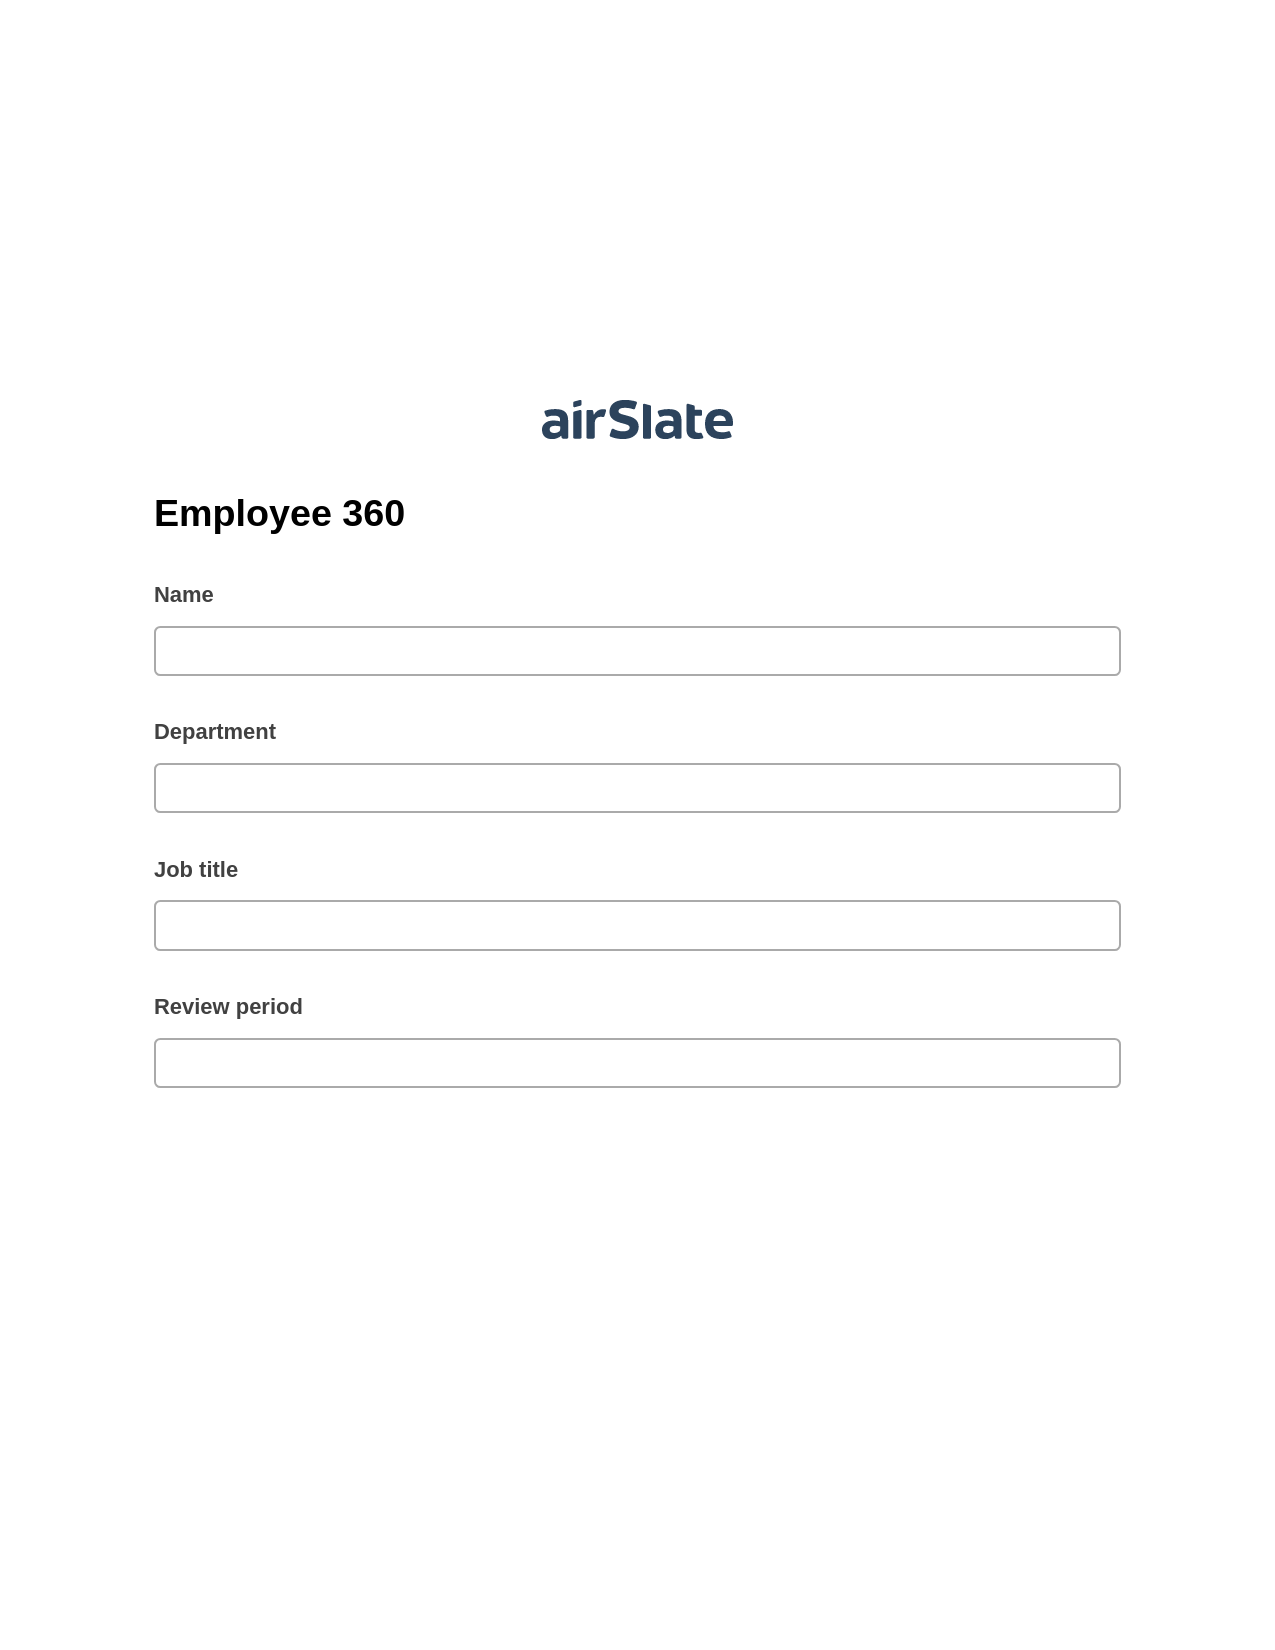 Employee 360 Pre-fill Dropdowns from Airtable, Update MS Dynamics 365 Record Bot, Archive to Dropbox Bot